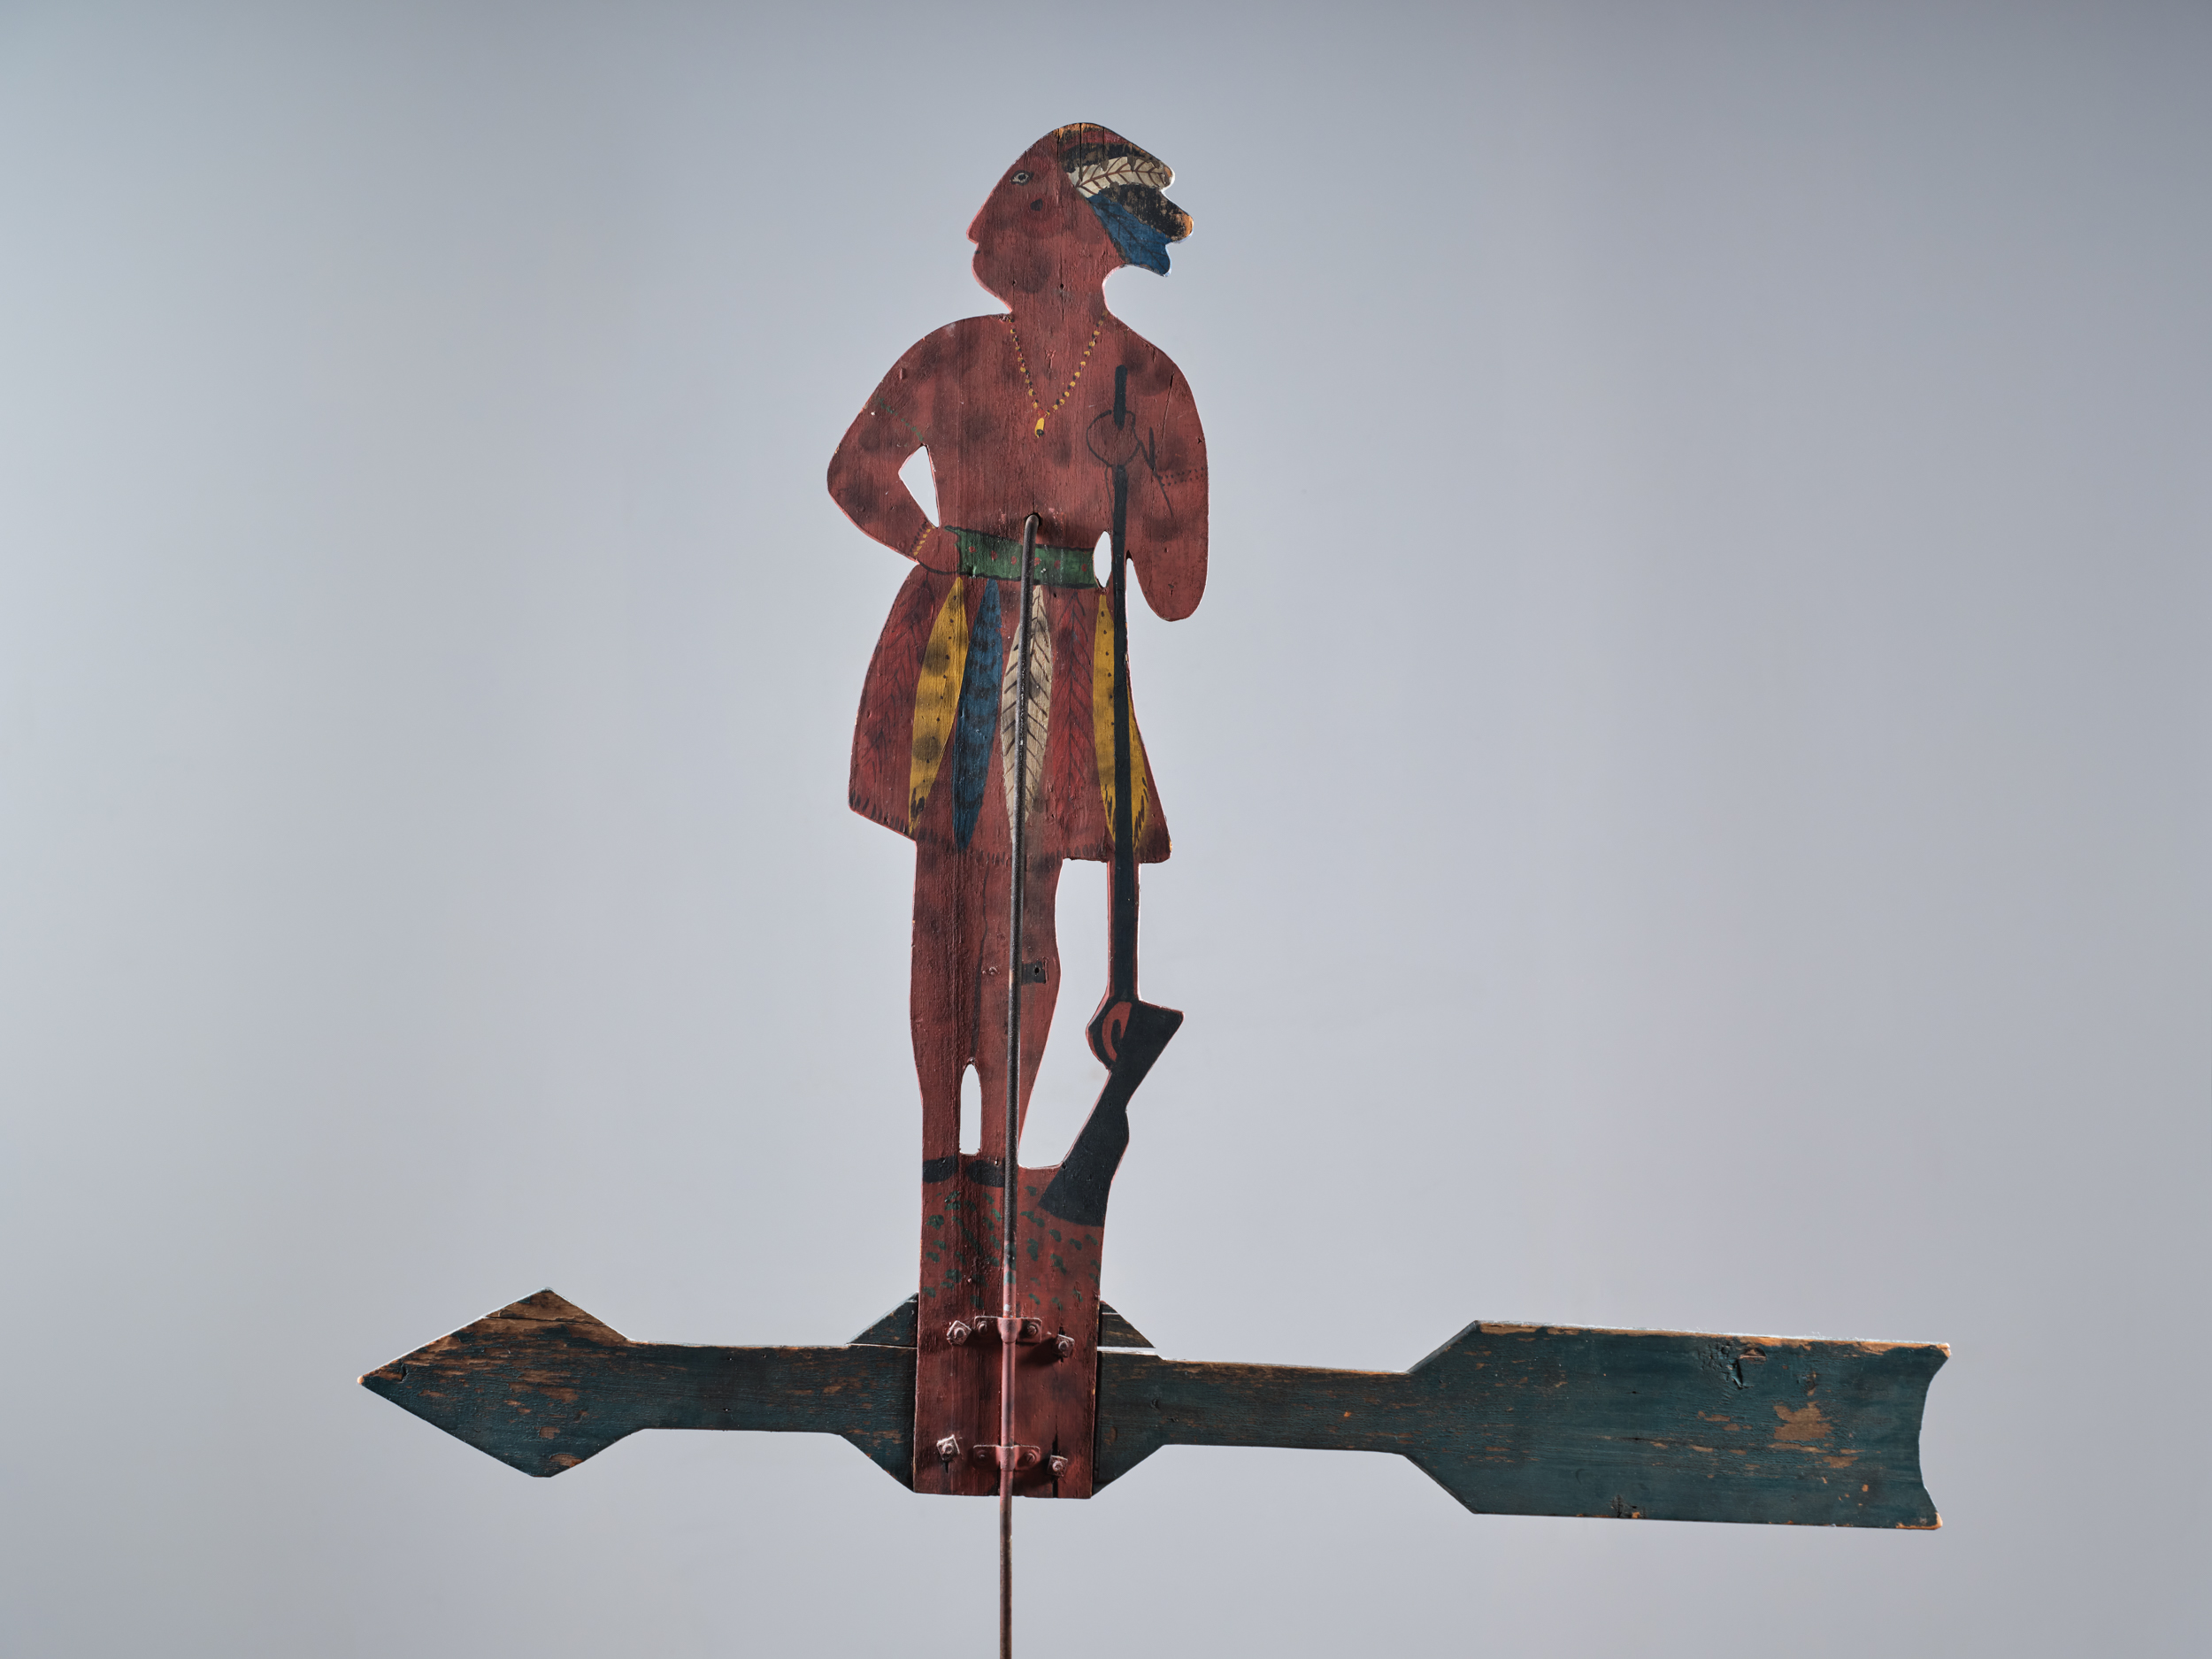 painted pine indian weathervane rel=